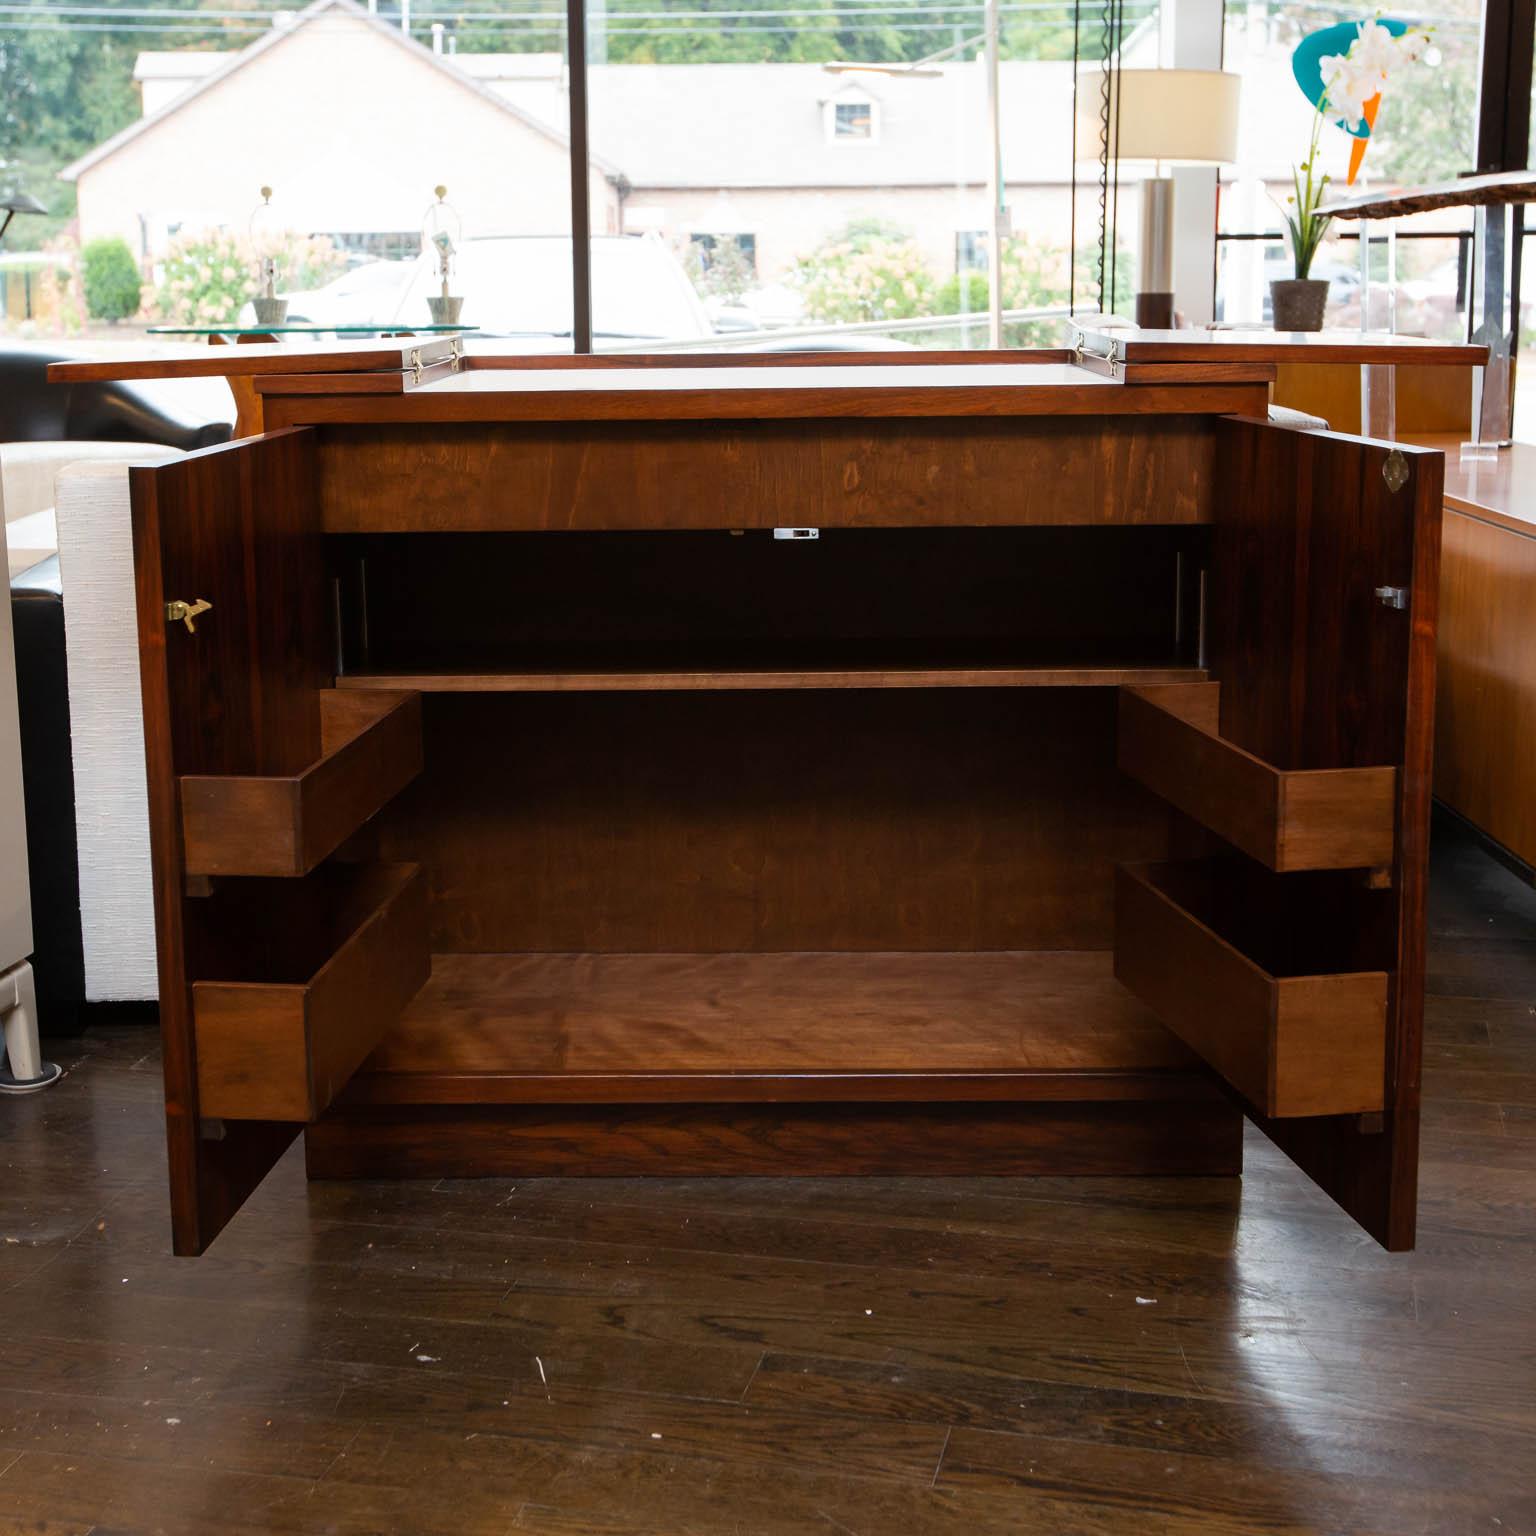 Restored mid-Century Modern rosewood bar cabinet with white formica deck hidden under its book matched rosewood outer veneer. Center well for ice or drink preparation. Shelves on doors for liquor bottles and glasses. Lock does not have key. Open the